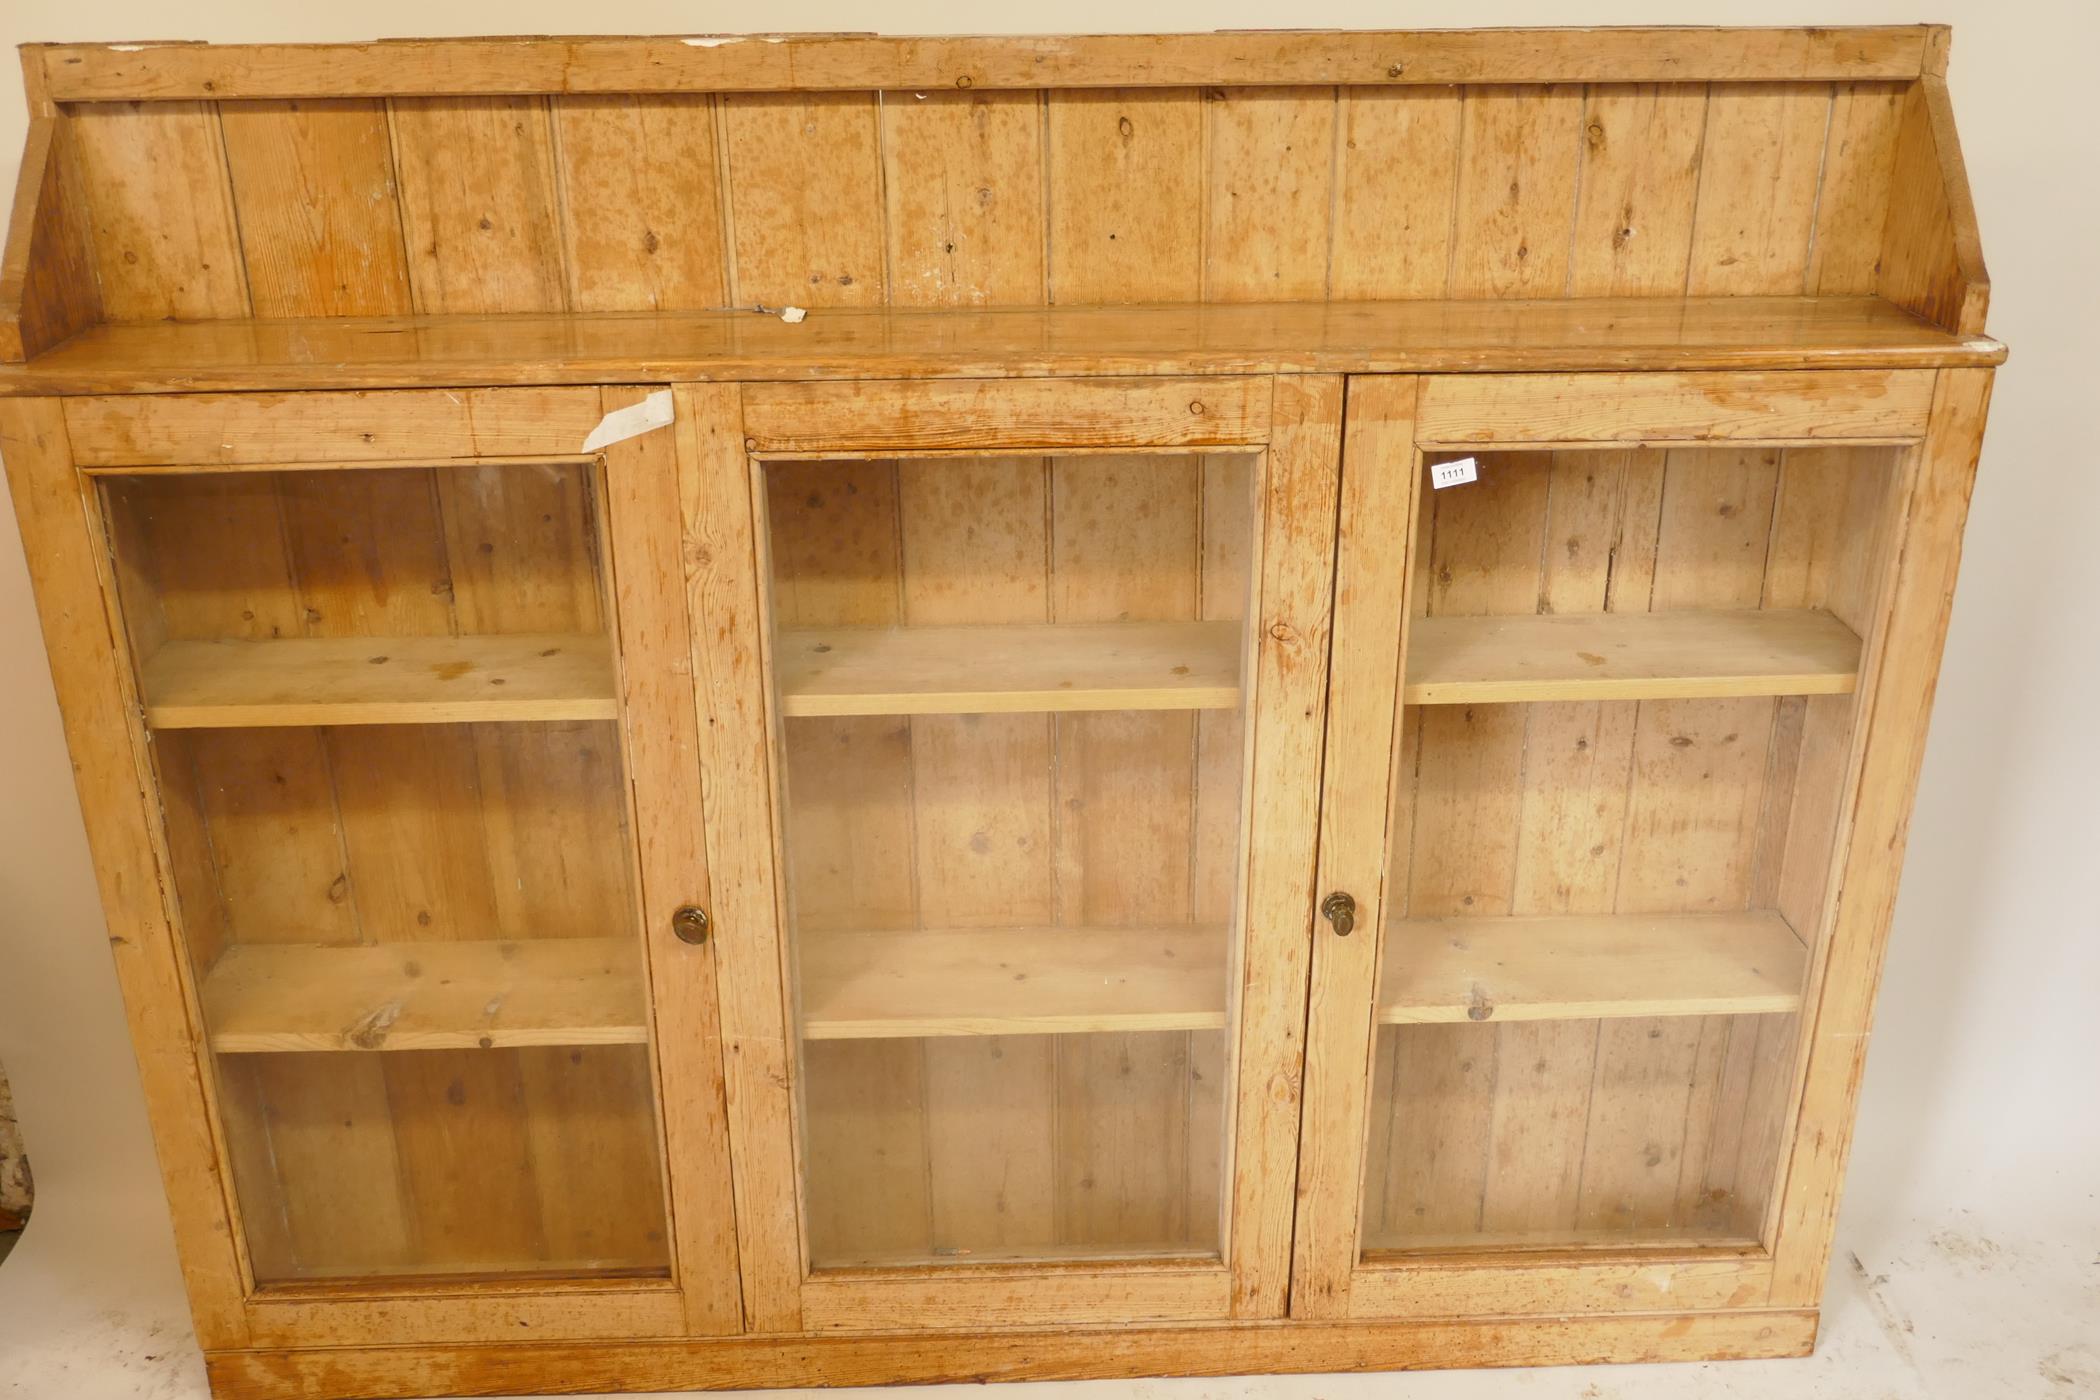 An antique stripped pine side cabinet, with three glazed doors, 69" x 9" x 54" - Image 2 of 2